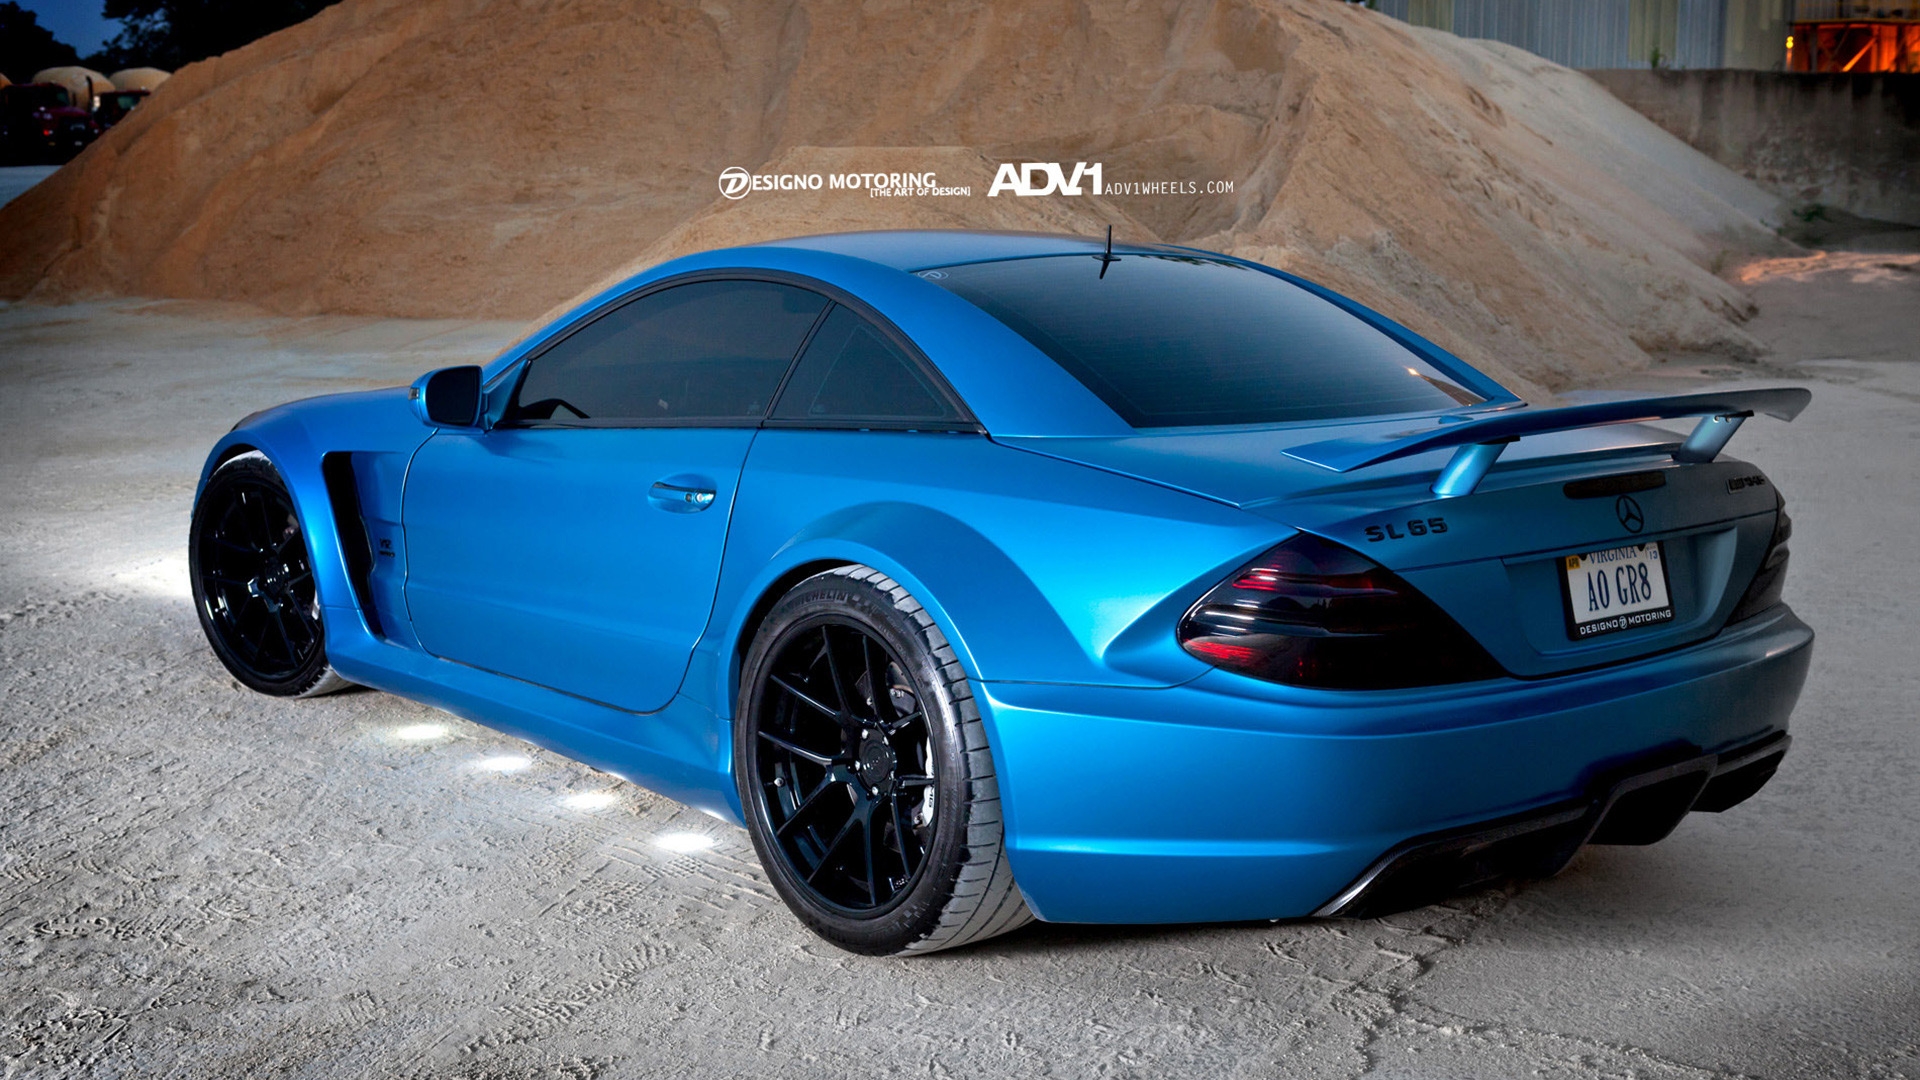 SL65 AMG by ADV Wheels for 1920 x 1080 HDTV 1080p resolution